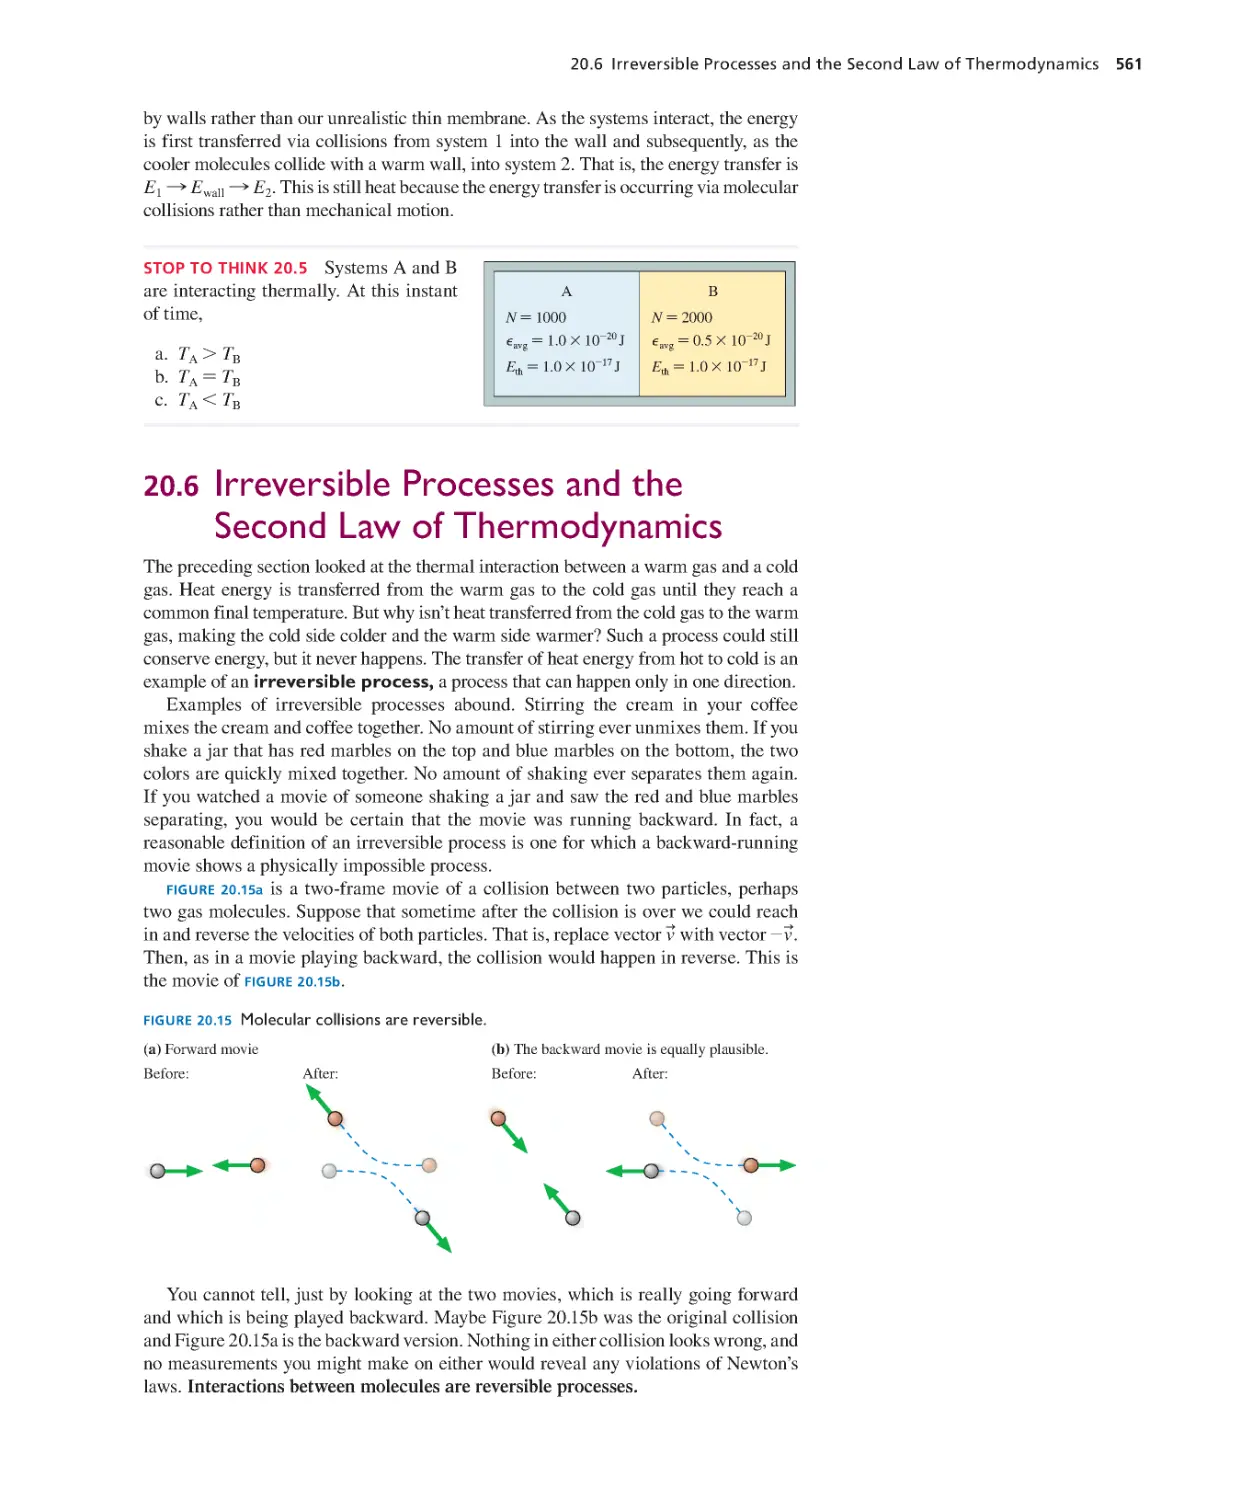 20.6. Irreversible Processes and the Second Law of Thermodynamics